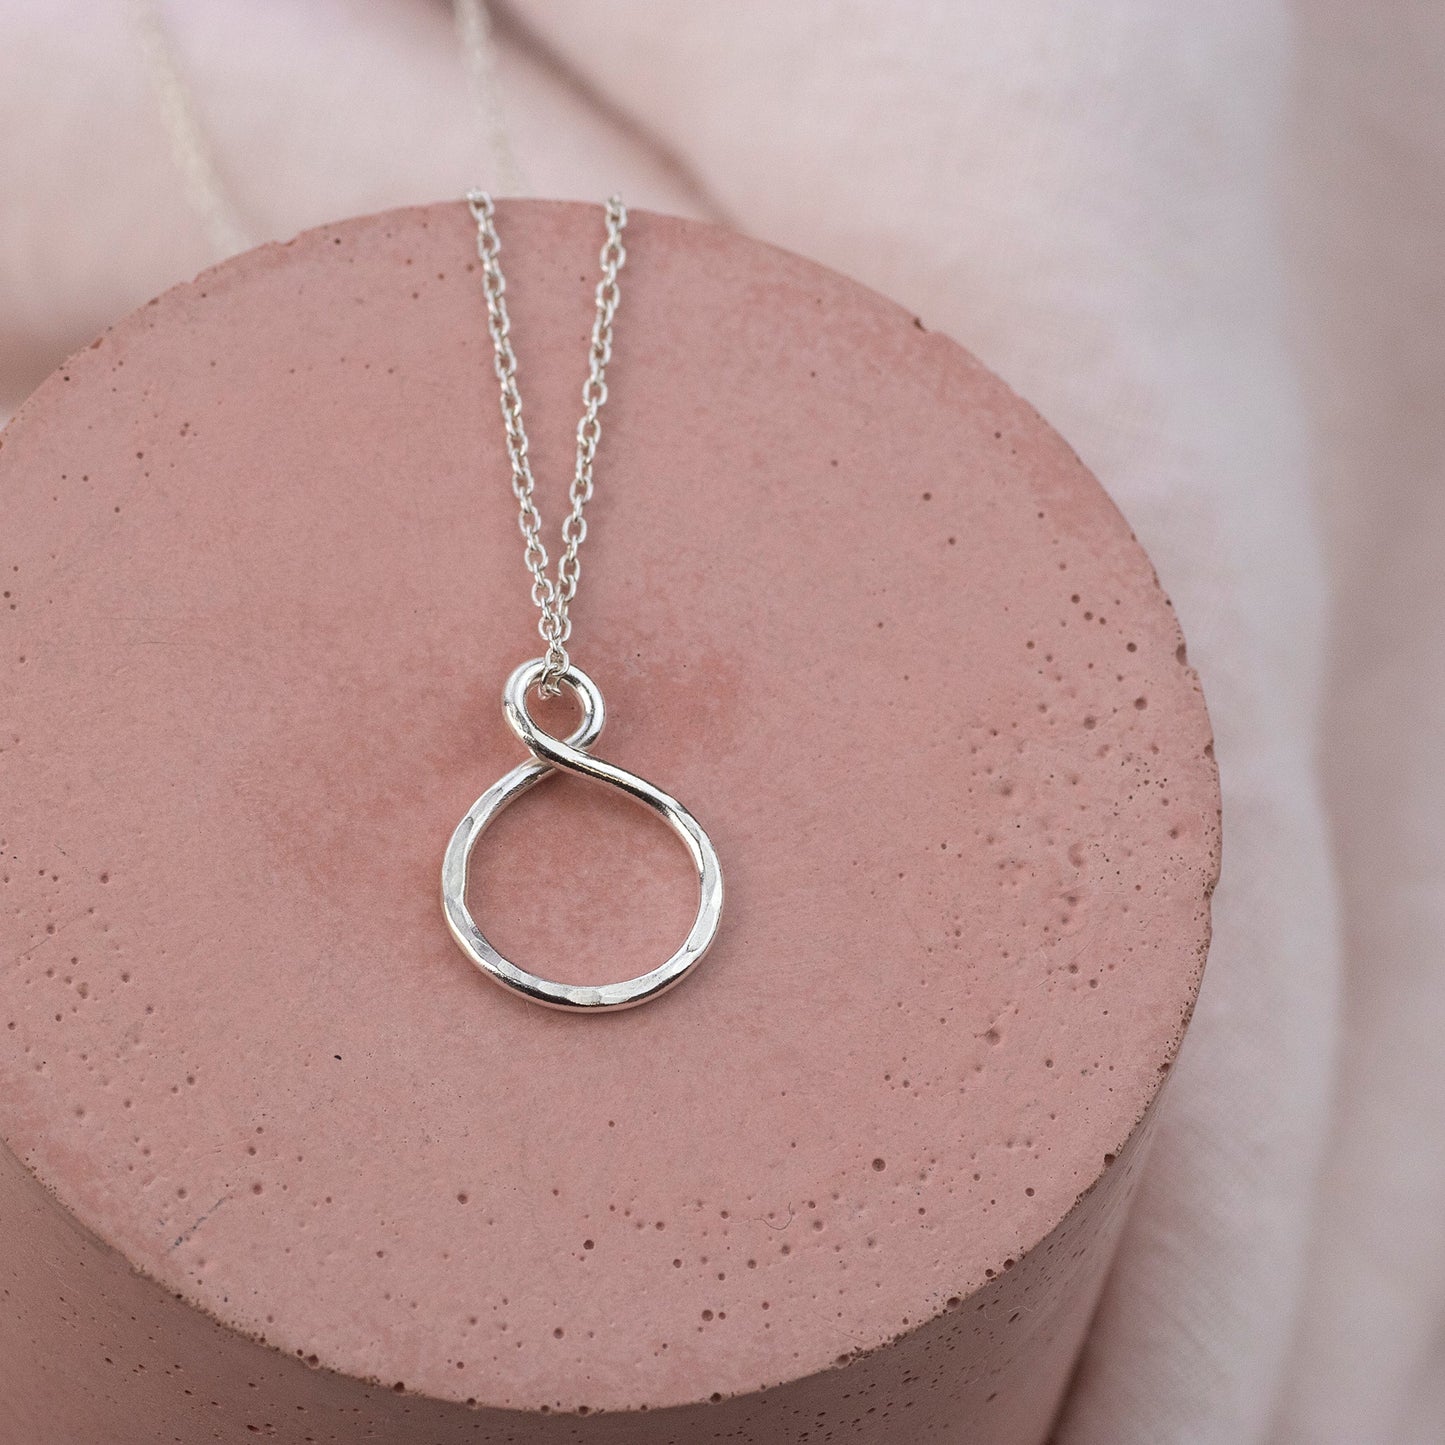 16th Birthday Gift - Petite Infinity Necklace - Silver